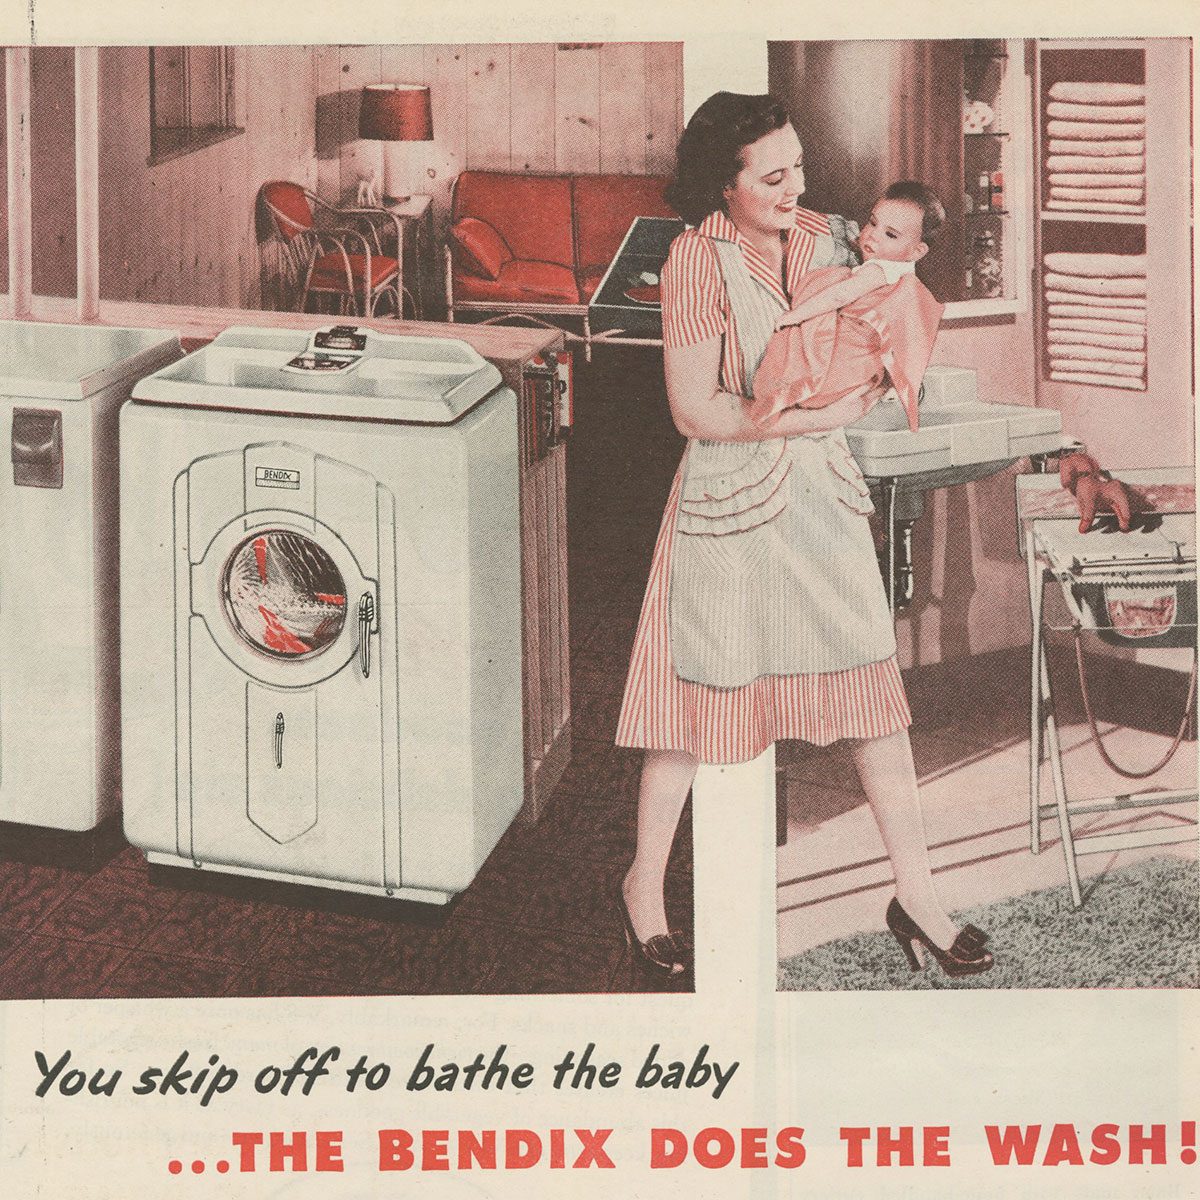 Get the Retro Kitchen Appliance Look for Less